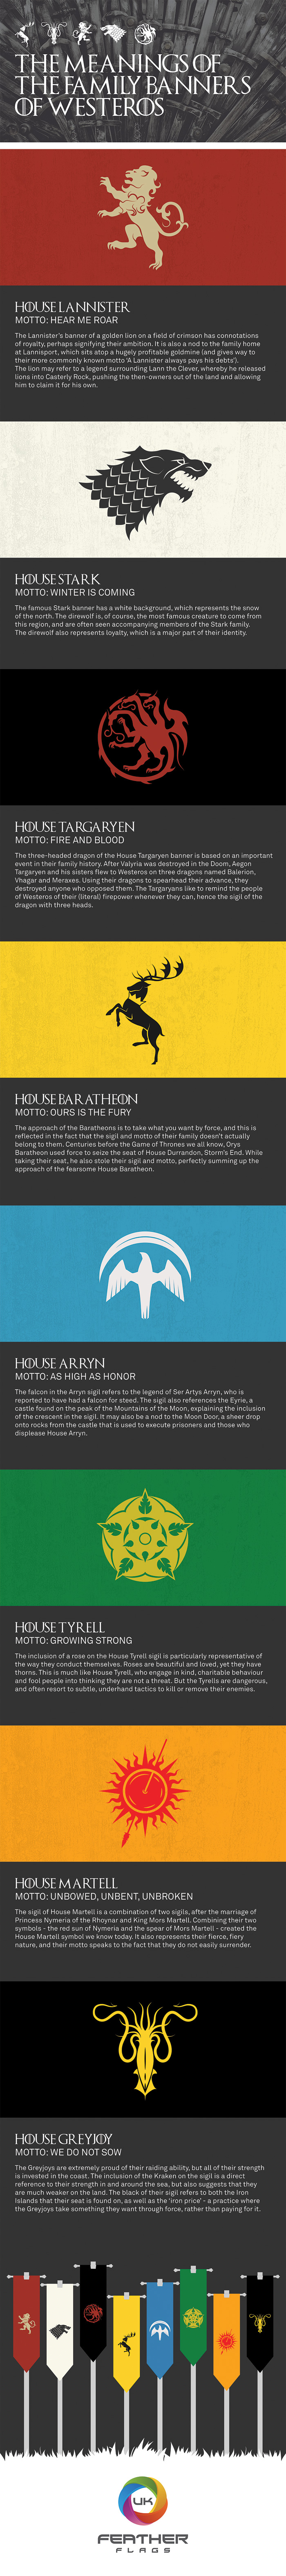 The Meaning of the Family Banners of Westeros